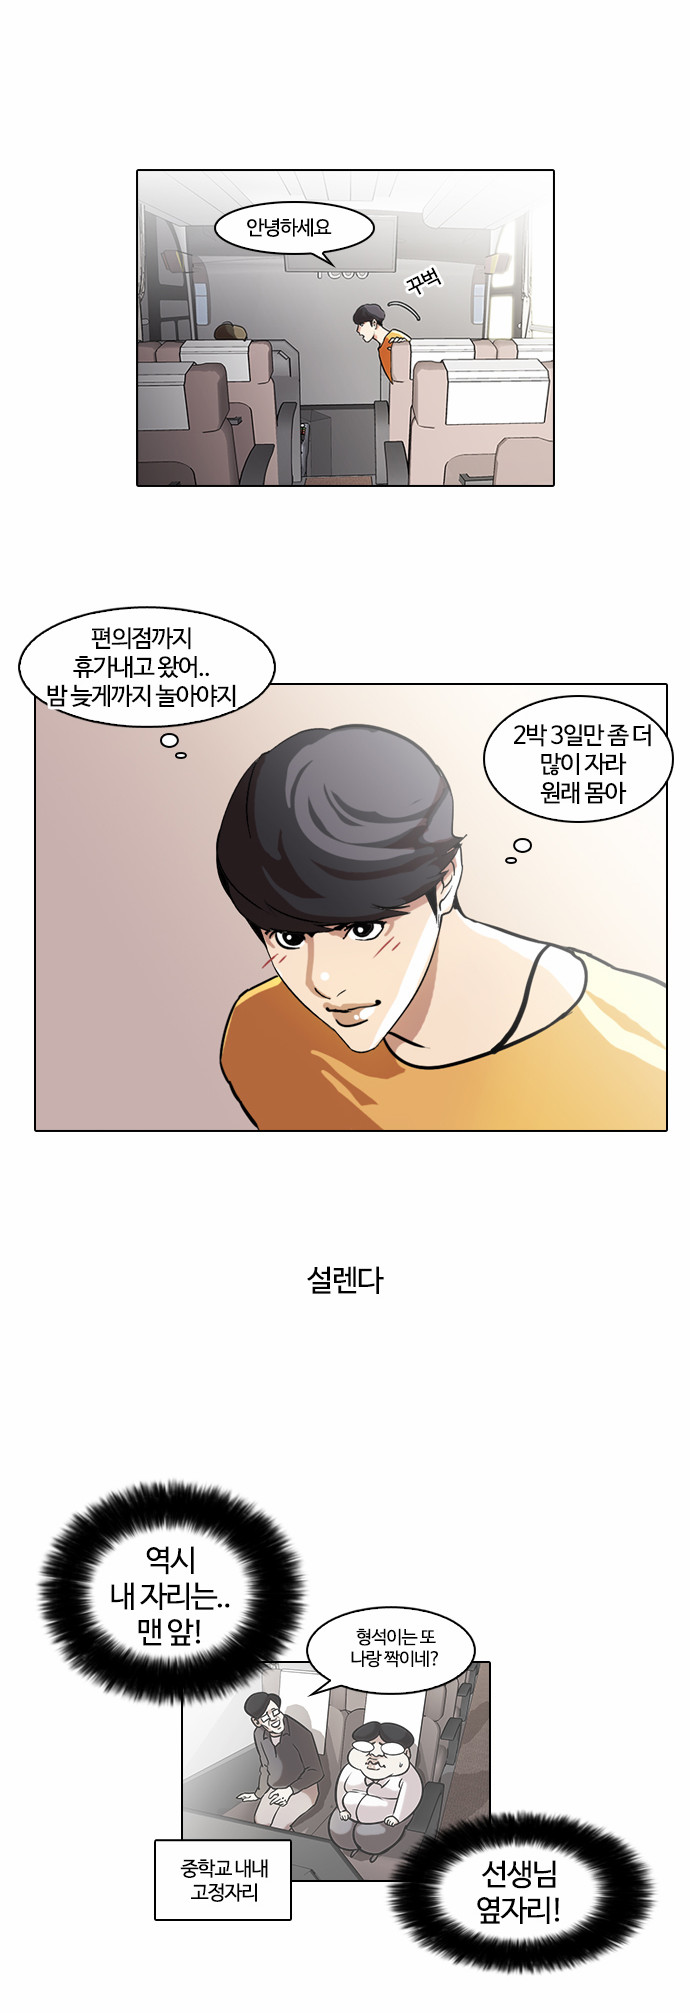 Lookism - Chapter 41 - Page 3